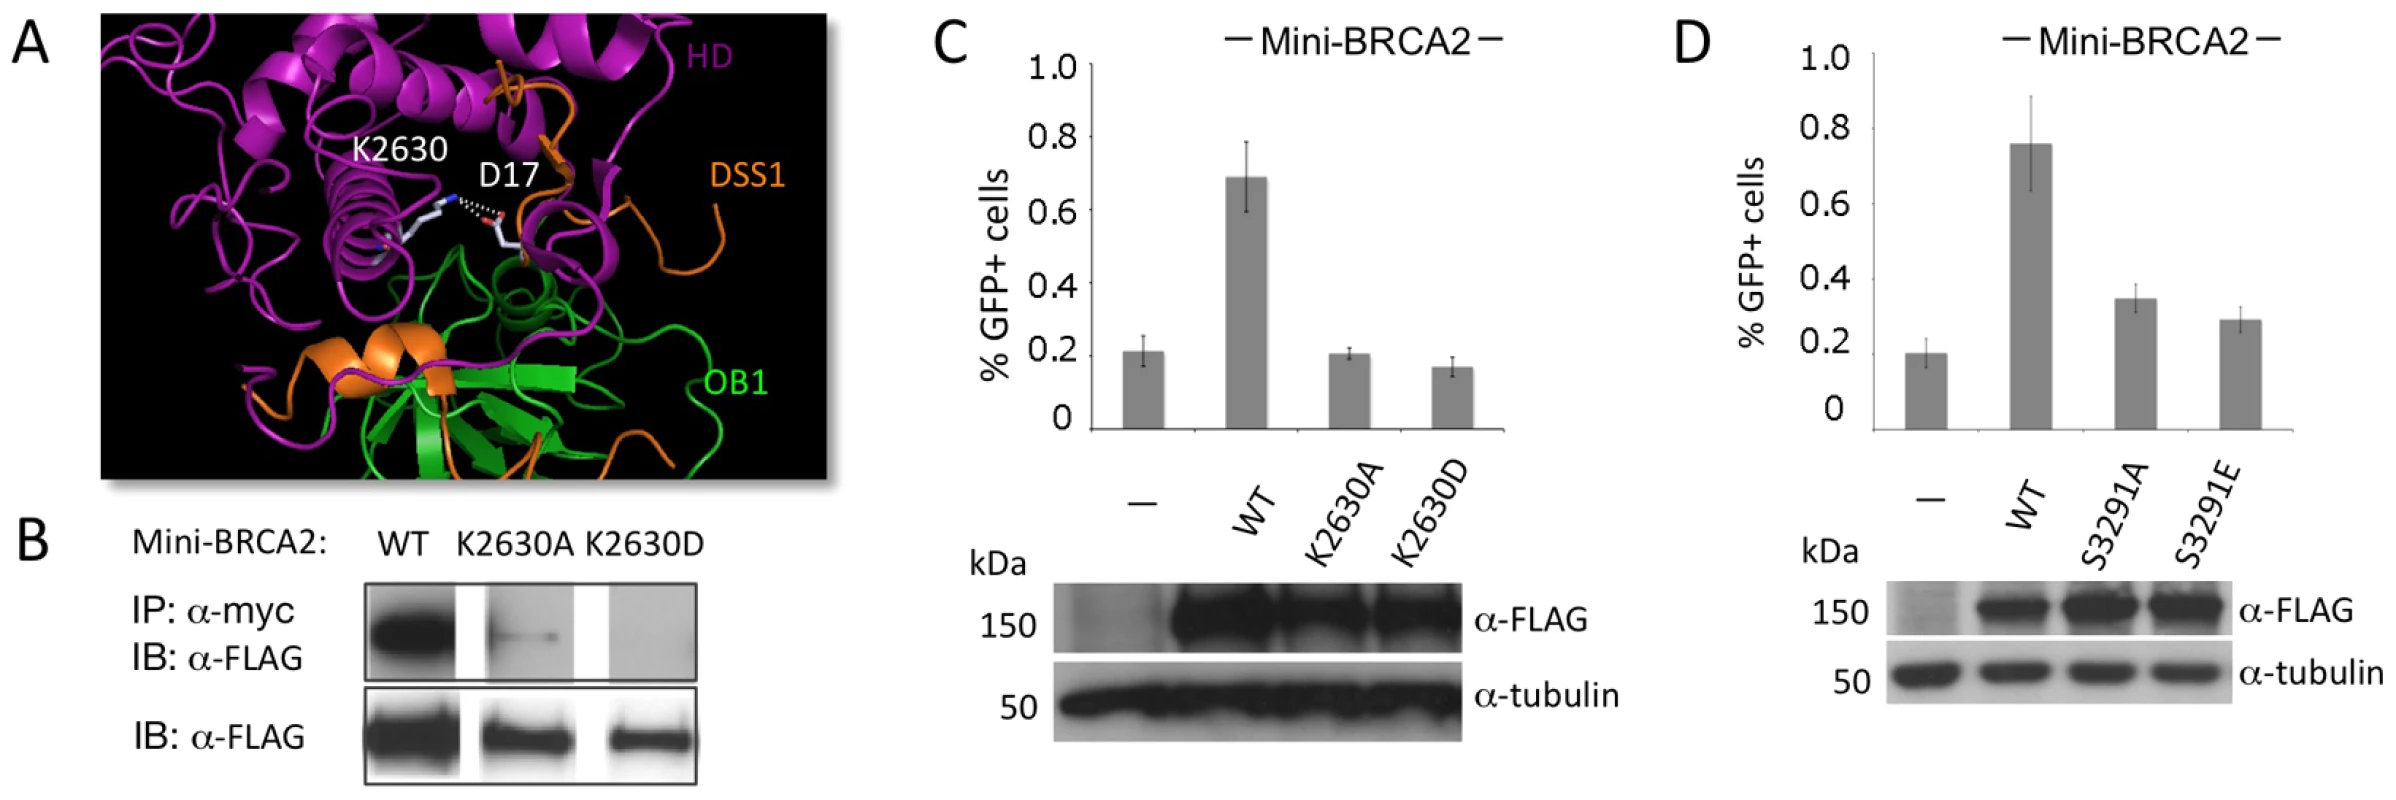 Mutation of a DSS1-interacting residue or the Cter RAD51-interacting residue S3291 significantly reduces the HR activity of mini-BRCA2.